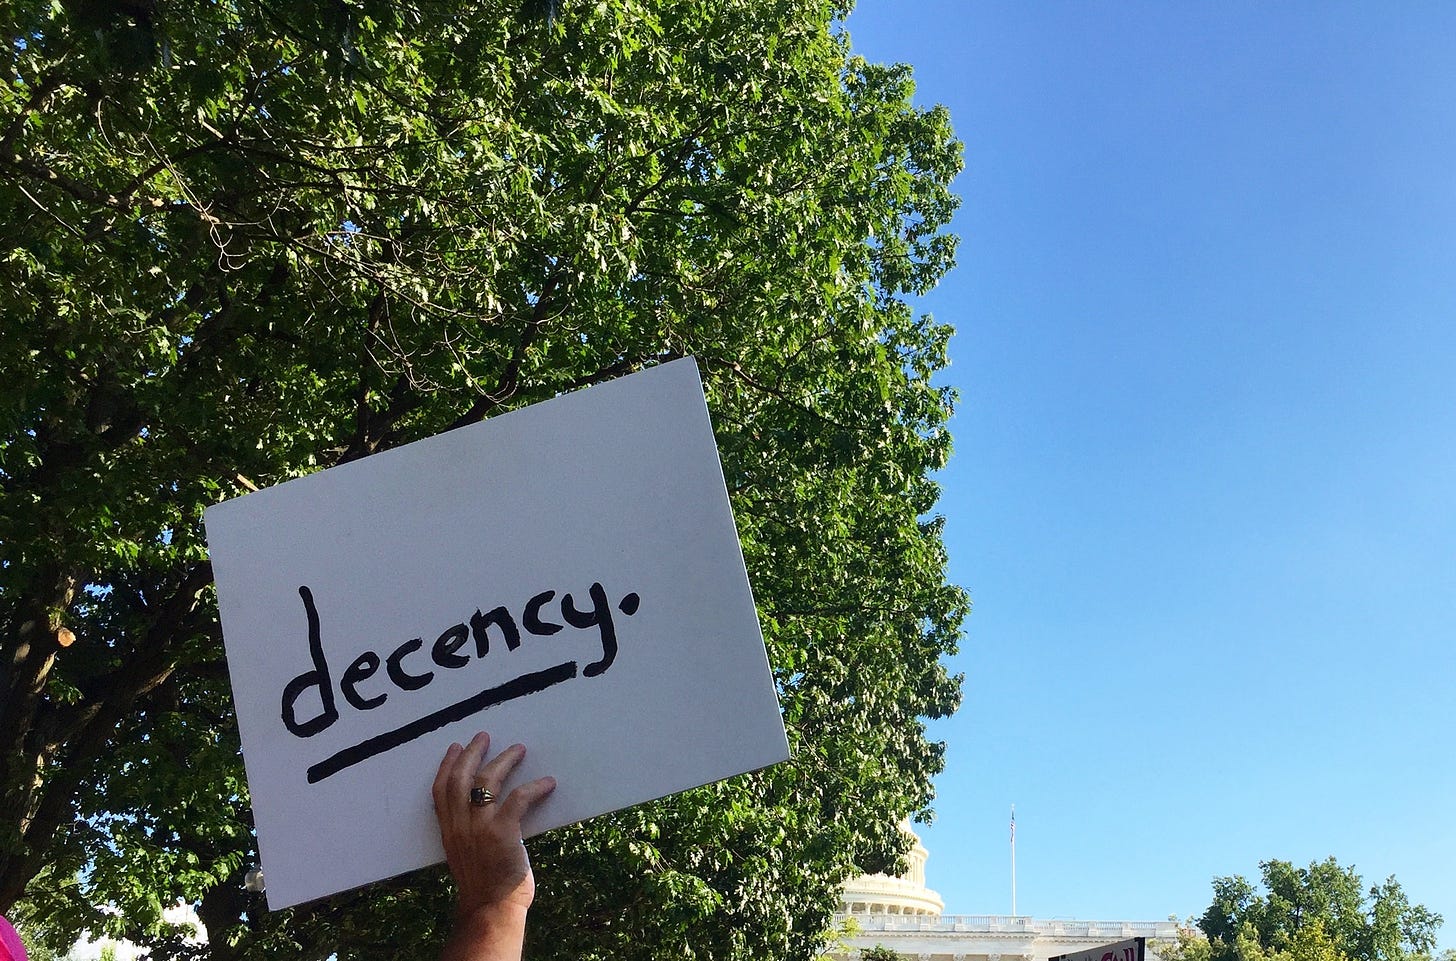 A photo of a protest sign held in the air by a man's right hand, against a background of a green-leafed tree and a blue sky. A white government building is visible on the horizon. The sign, written in black marker on white cardboard, simply reads "decency."